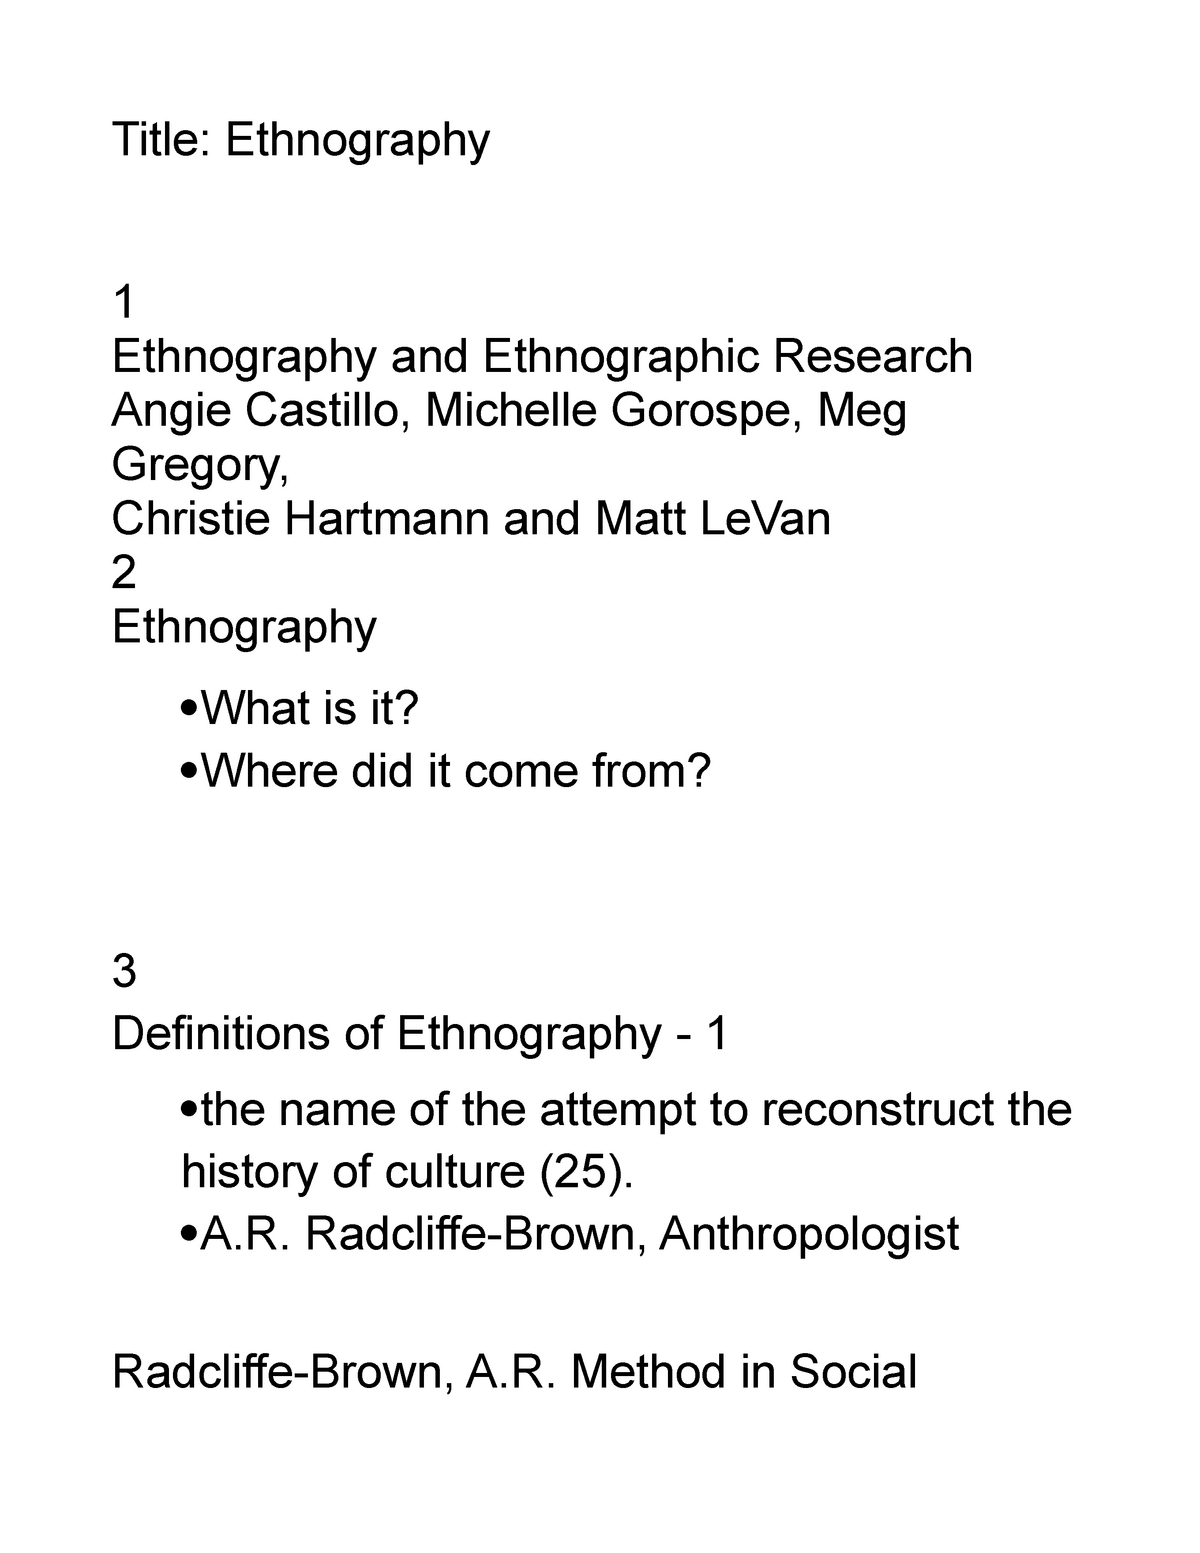 limitations to ethnographic research